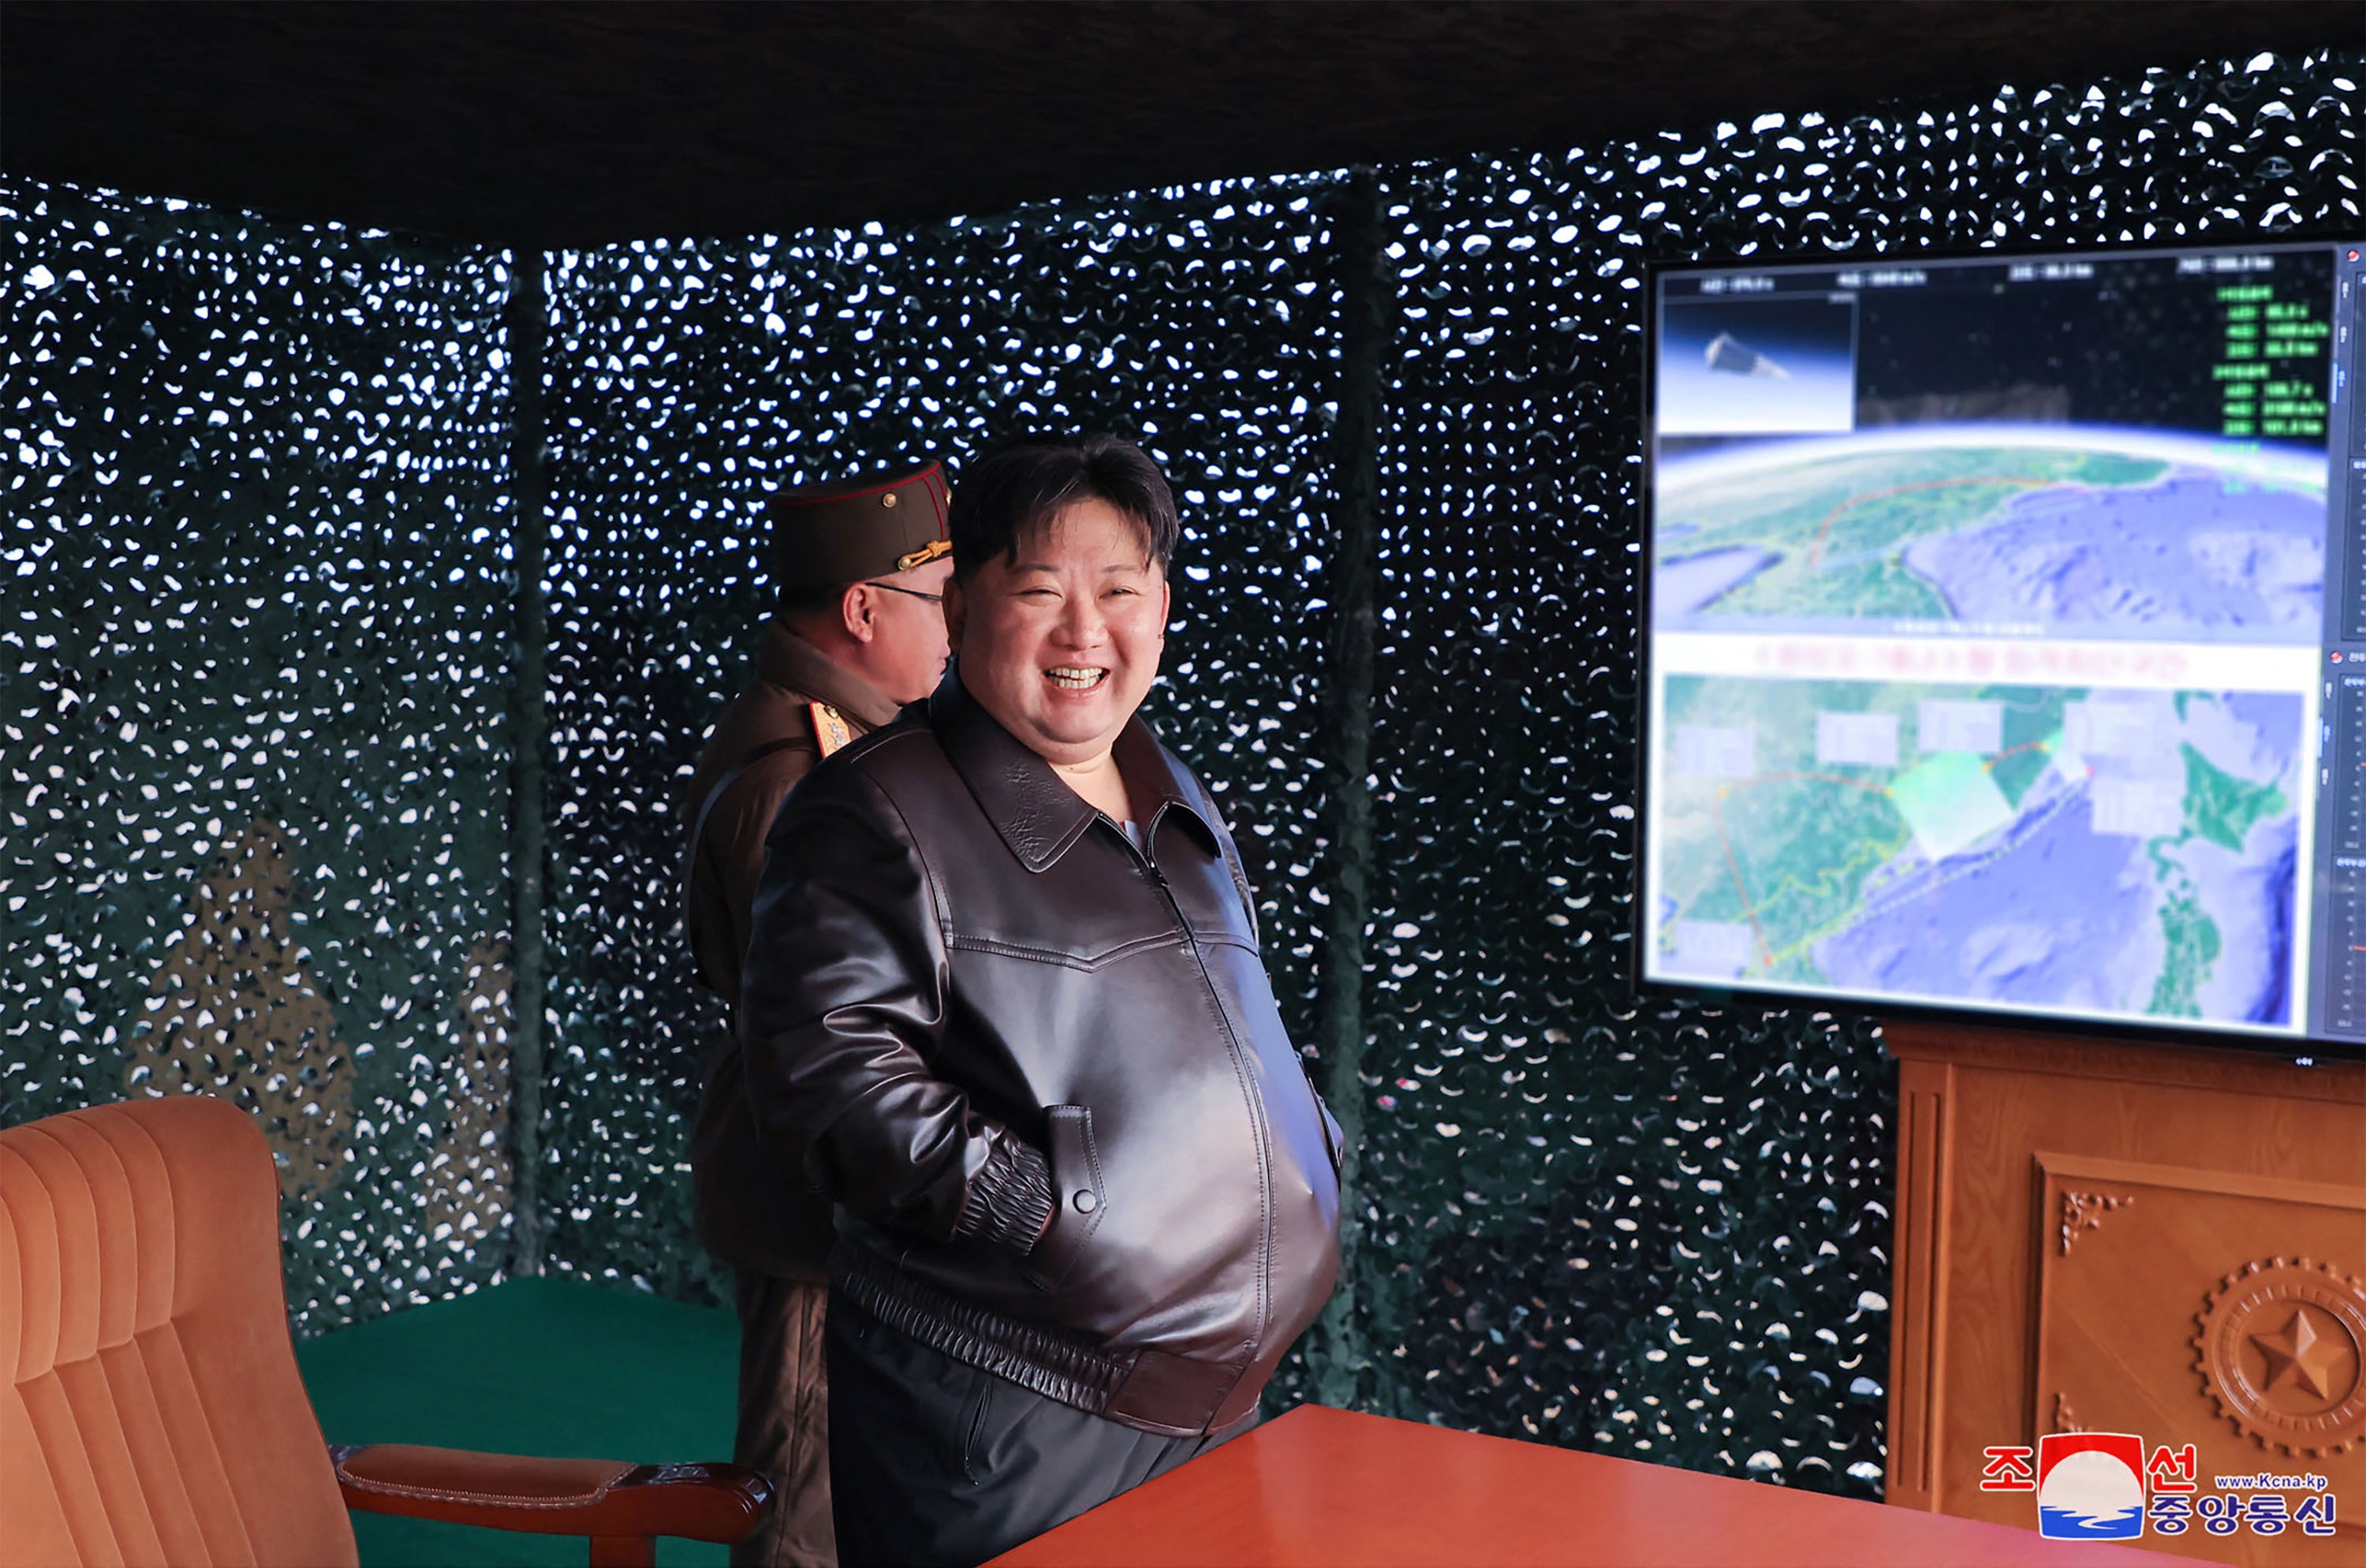 Kim Jong-un looks delighted during the missile launch on Tuesday